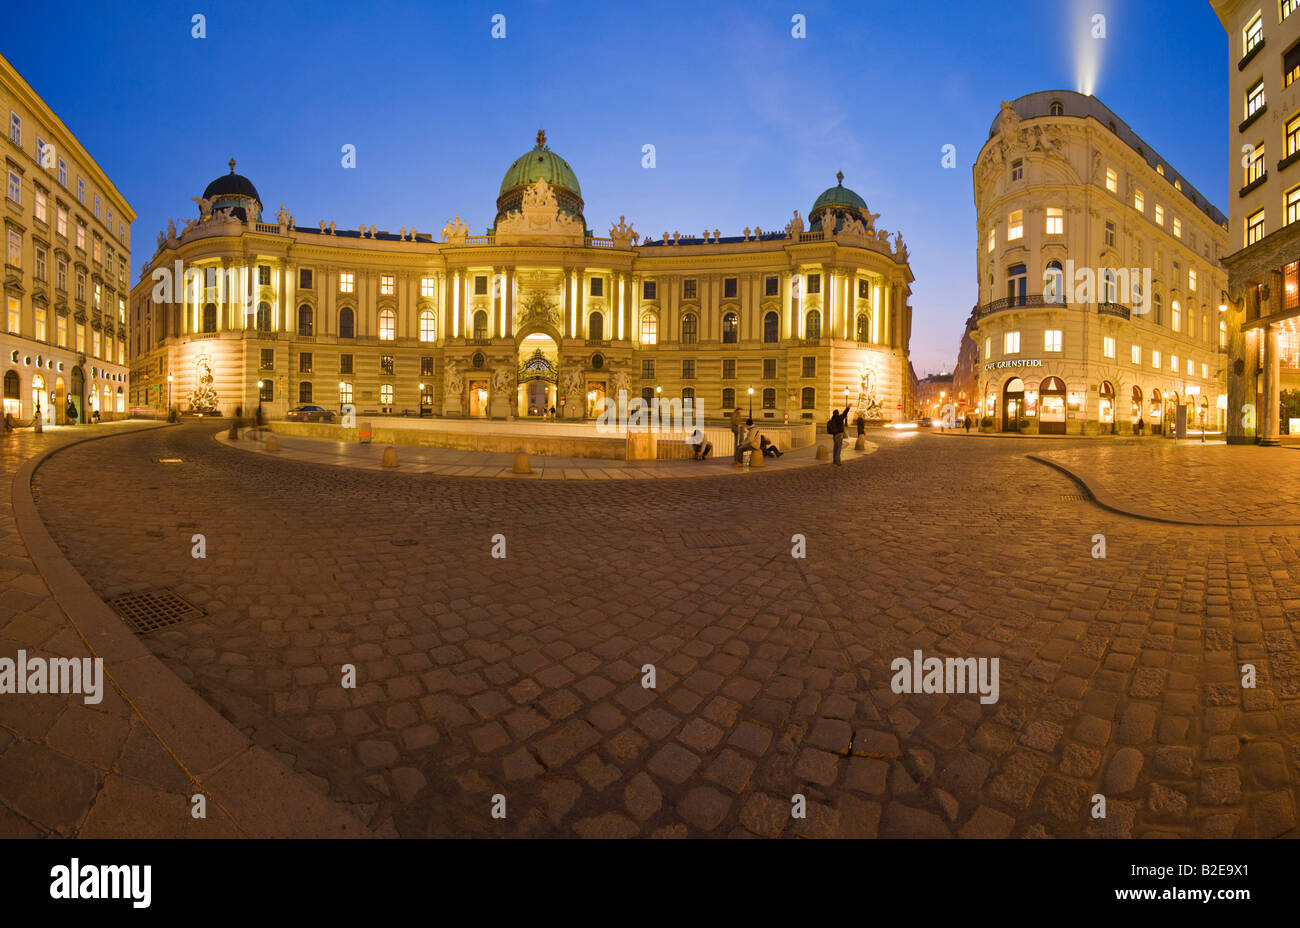 Palace and coffeehouse lit up at night Michaeler Platz Cafe Griensteidl Hofburg Imperial Palace Vienna Austria Stock Photo